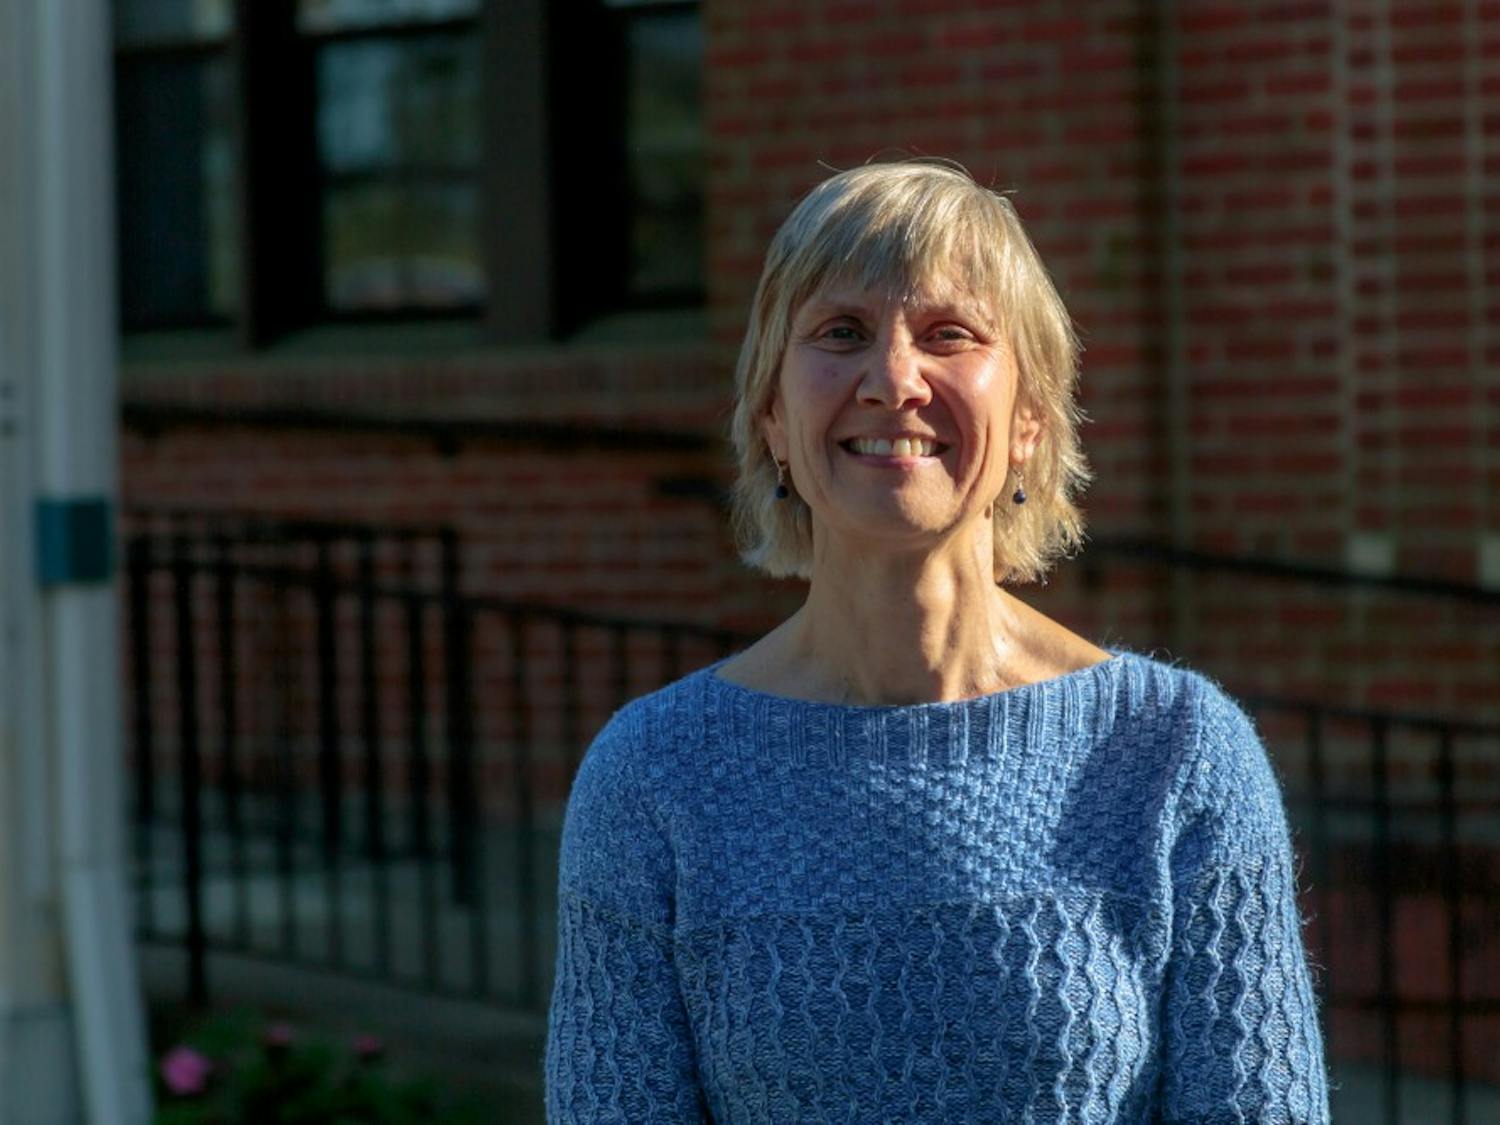 Susan Romaine has announced her candidacy for the Board of Aldermen of Carrboro.